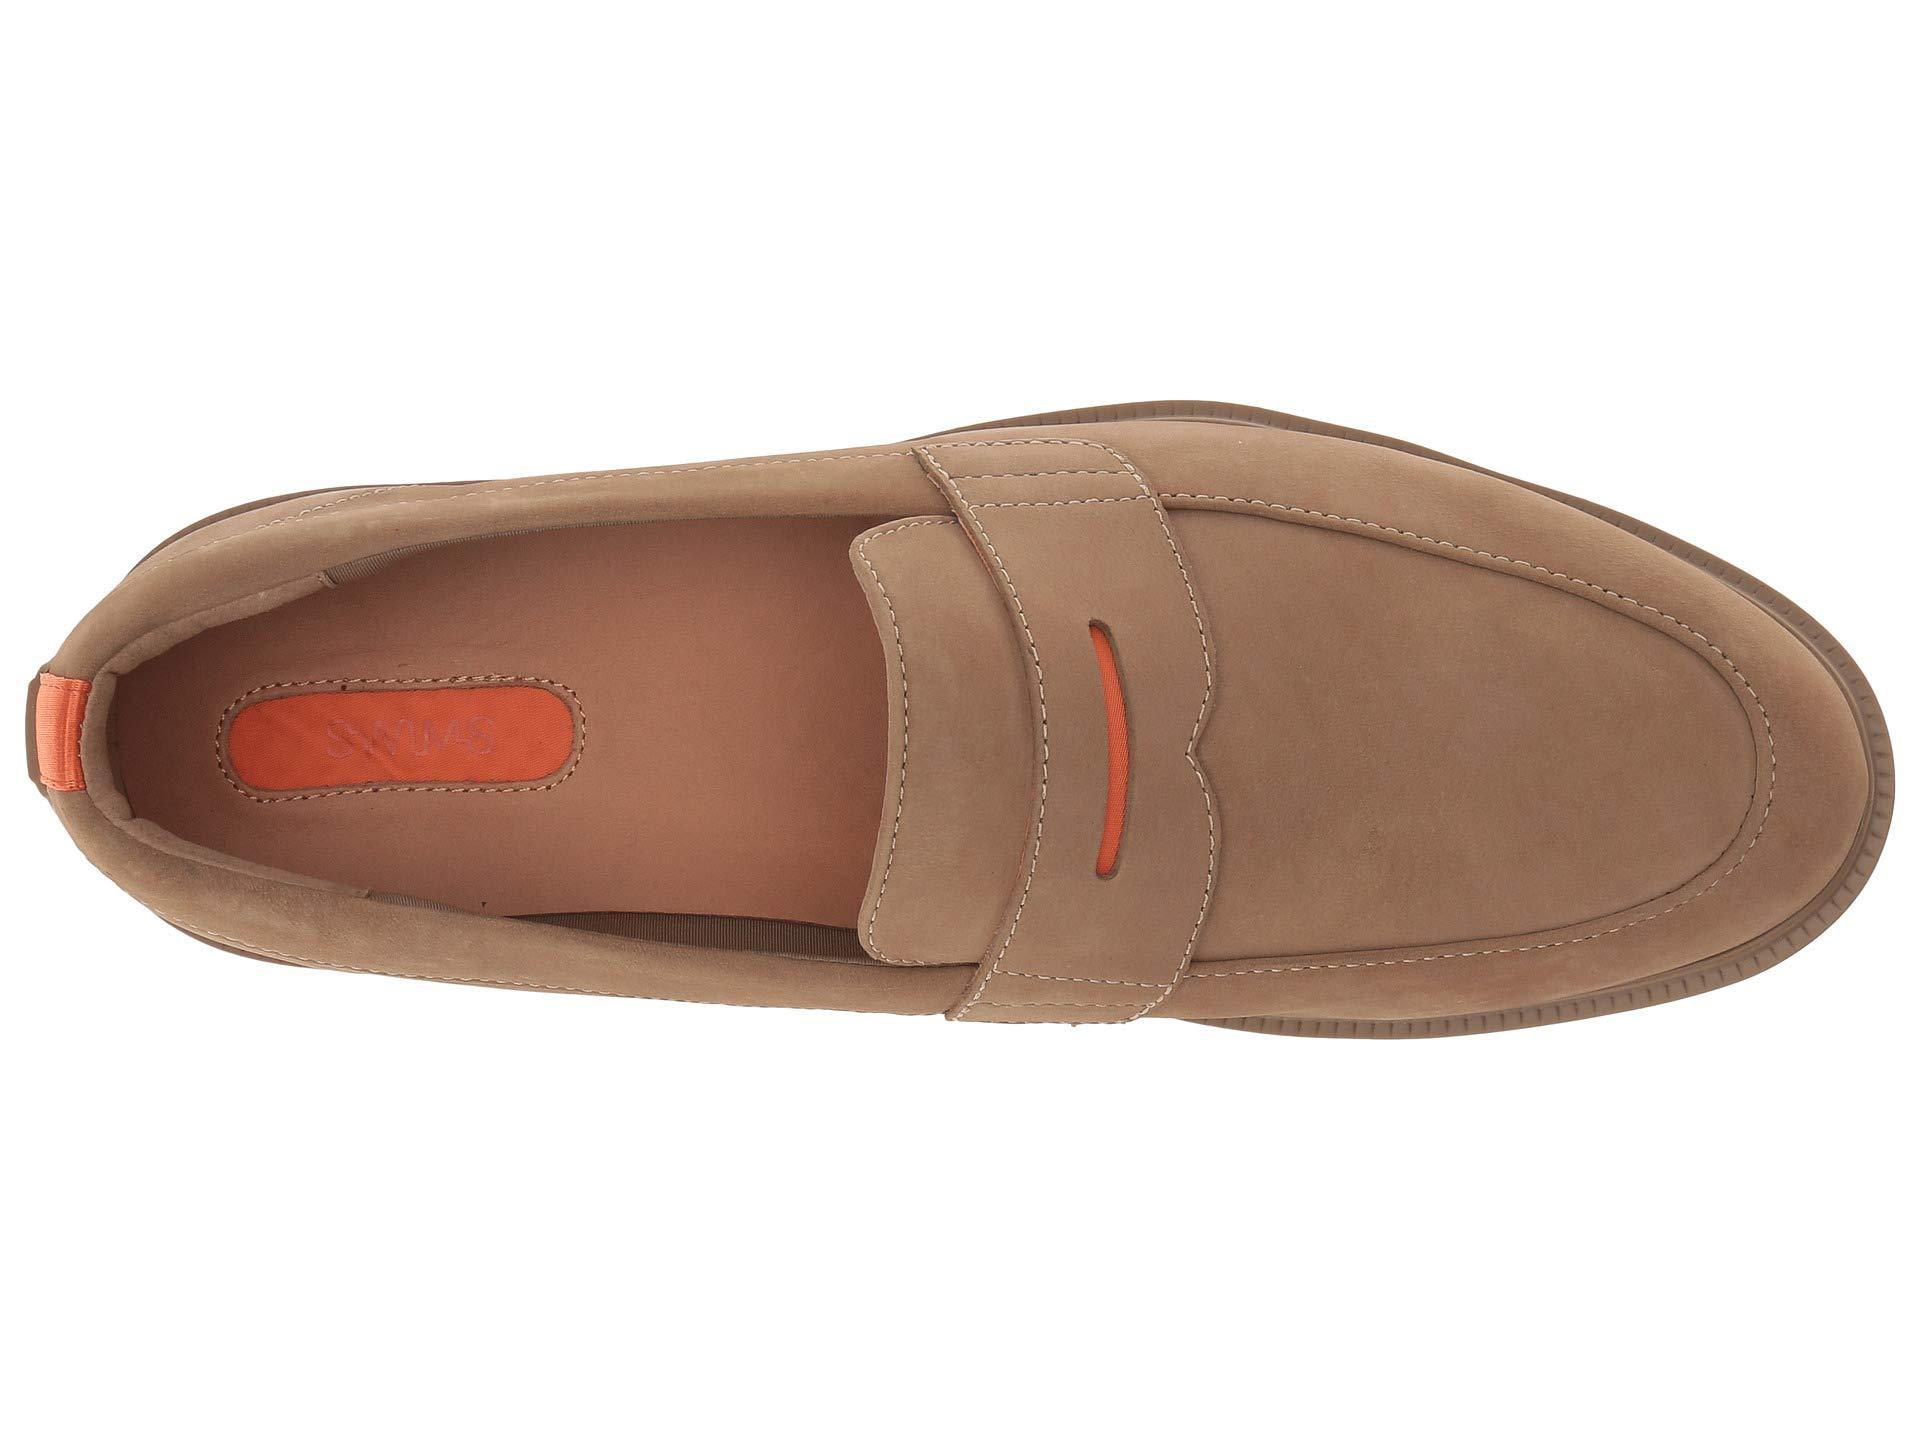 Swims Cotton Motion Penny Loafer in Brown for Men - Lyst